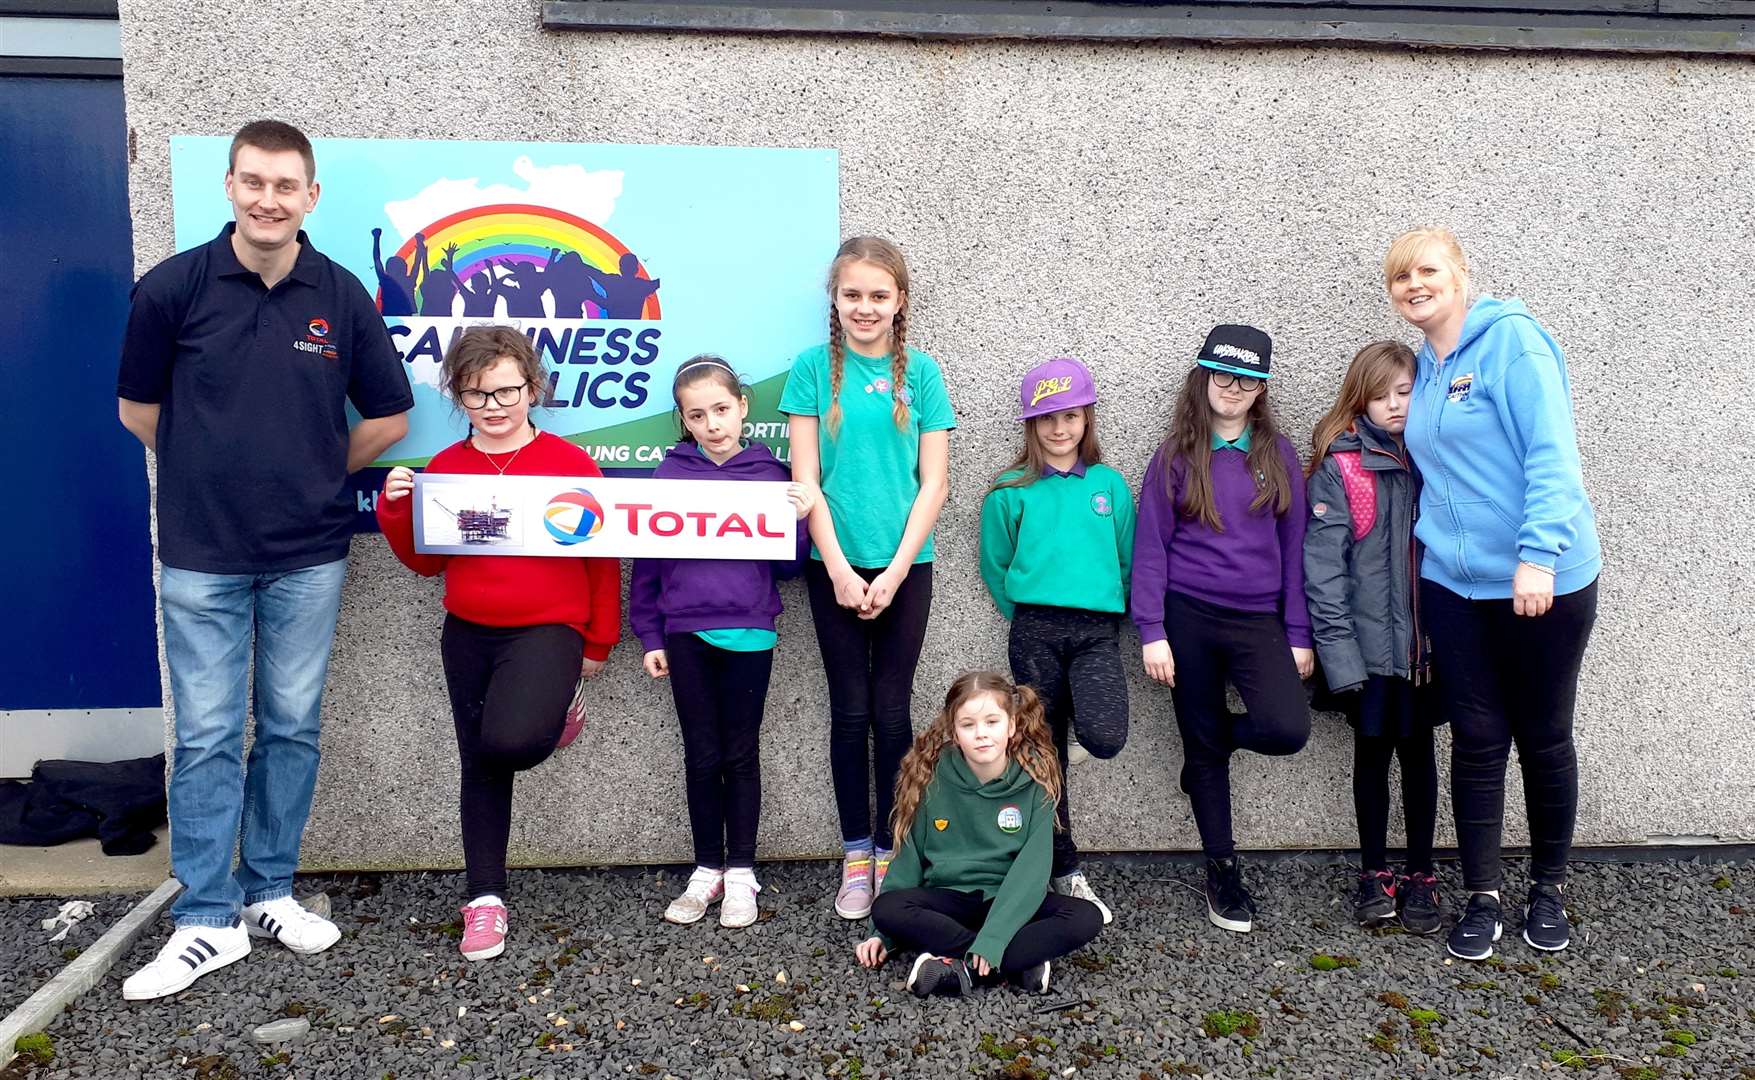 Andrew Gunn, pictured left, represented Total's Alwyn North oil platform along with project manager Wendy Thain, far right, and some of the Caithness Klics kids.